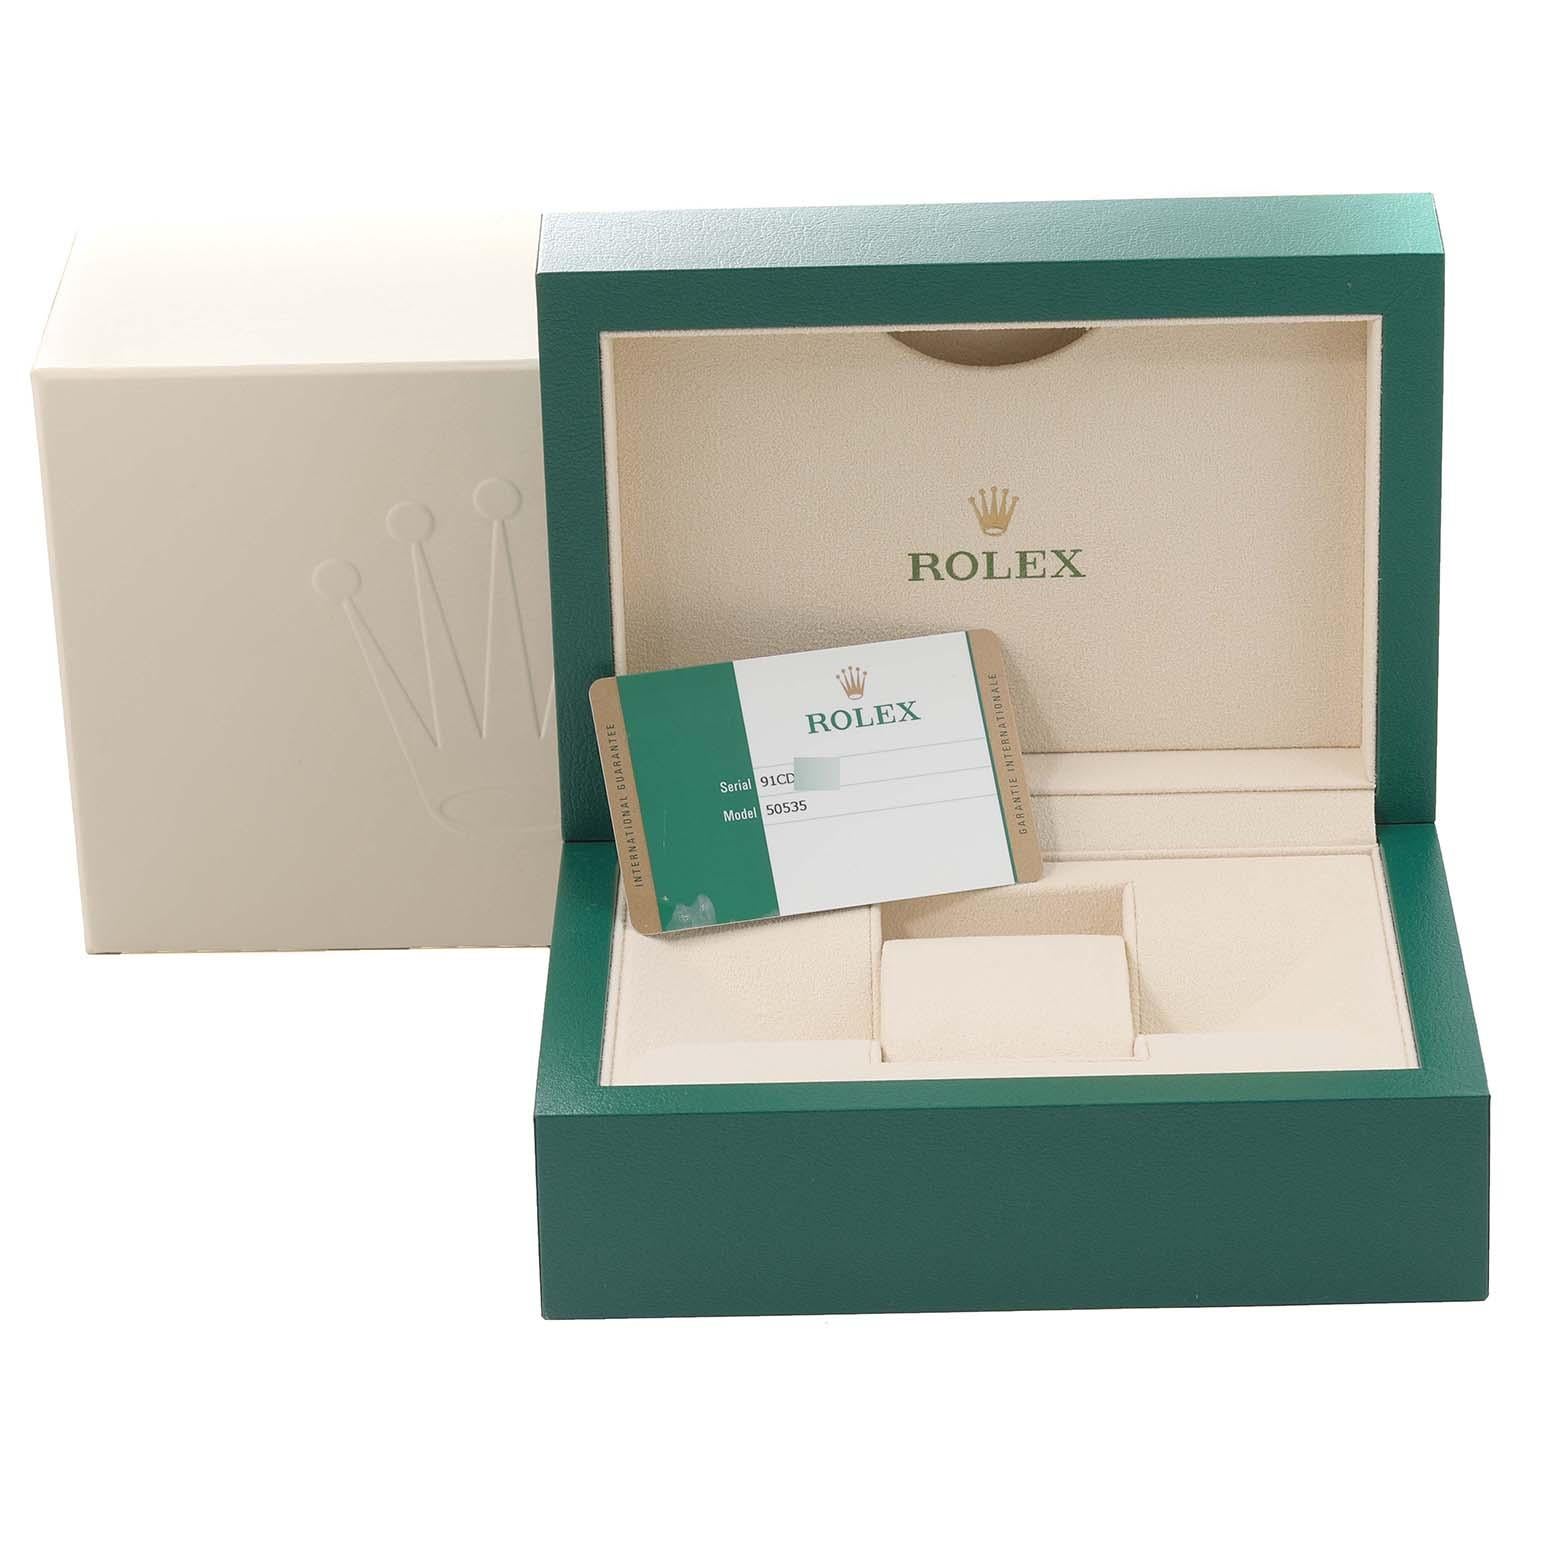 Rolex Cellini Moonphase White Dial Rose Gold Mens Watch 50535 Box Card 3